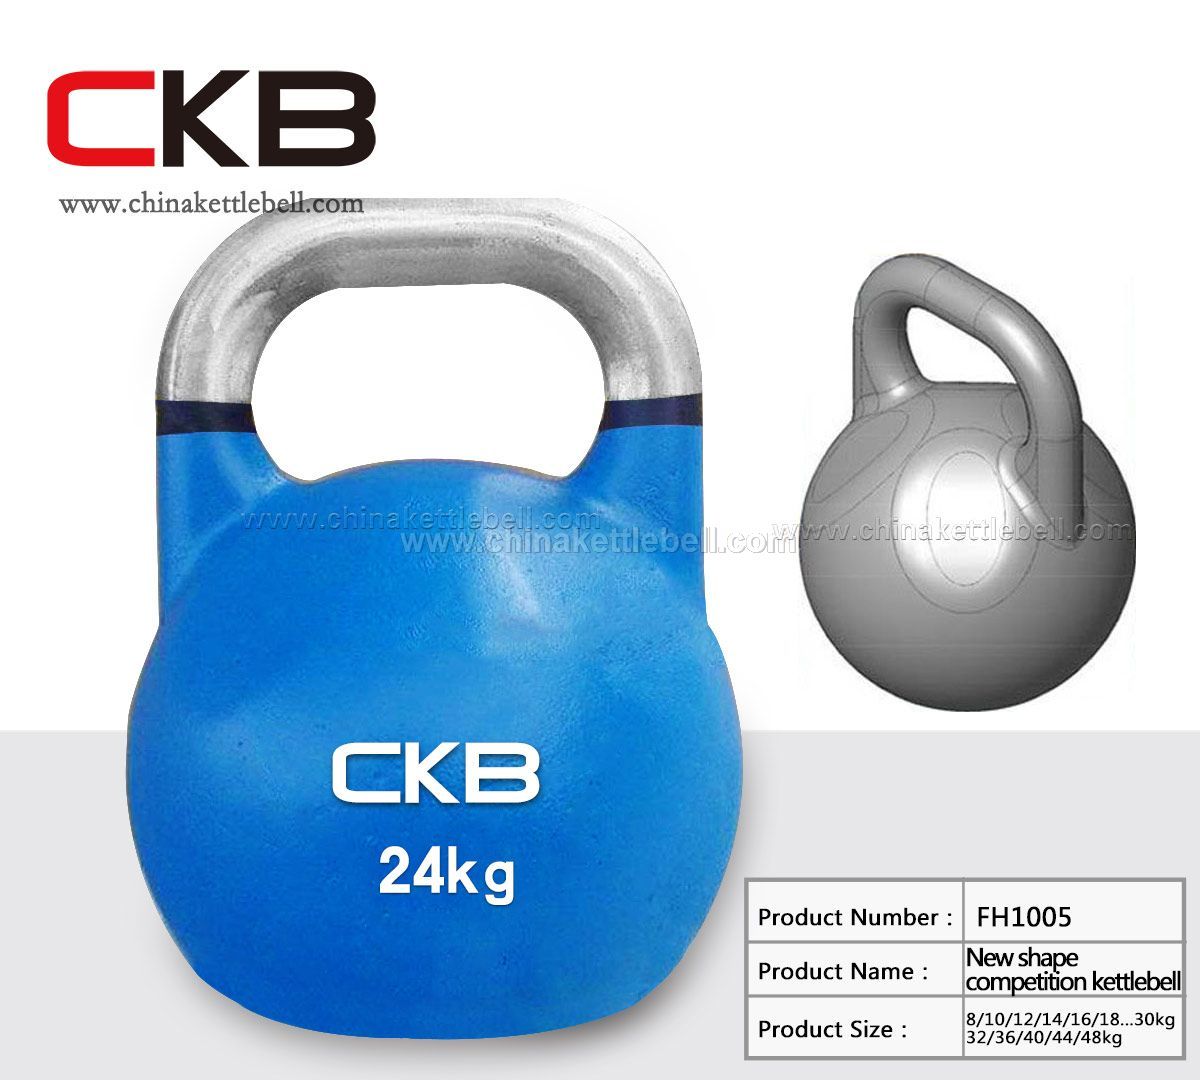 New shape competition kettlebell